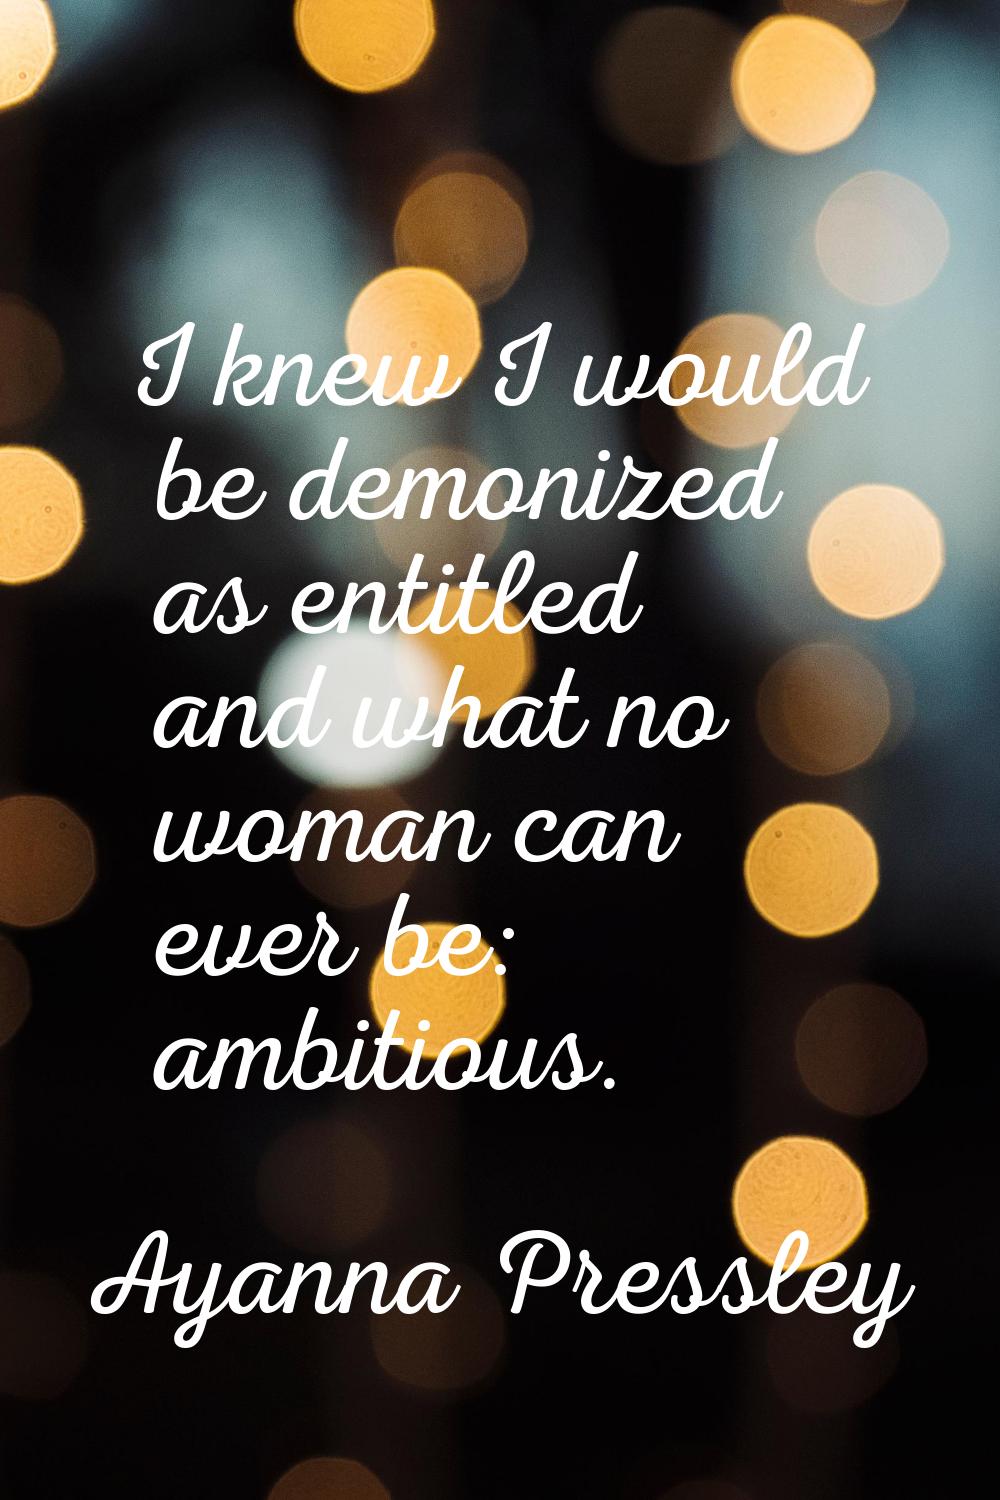 I knew I would be demonized as entitled and what no woman can ever be: ambitious.